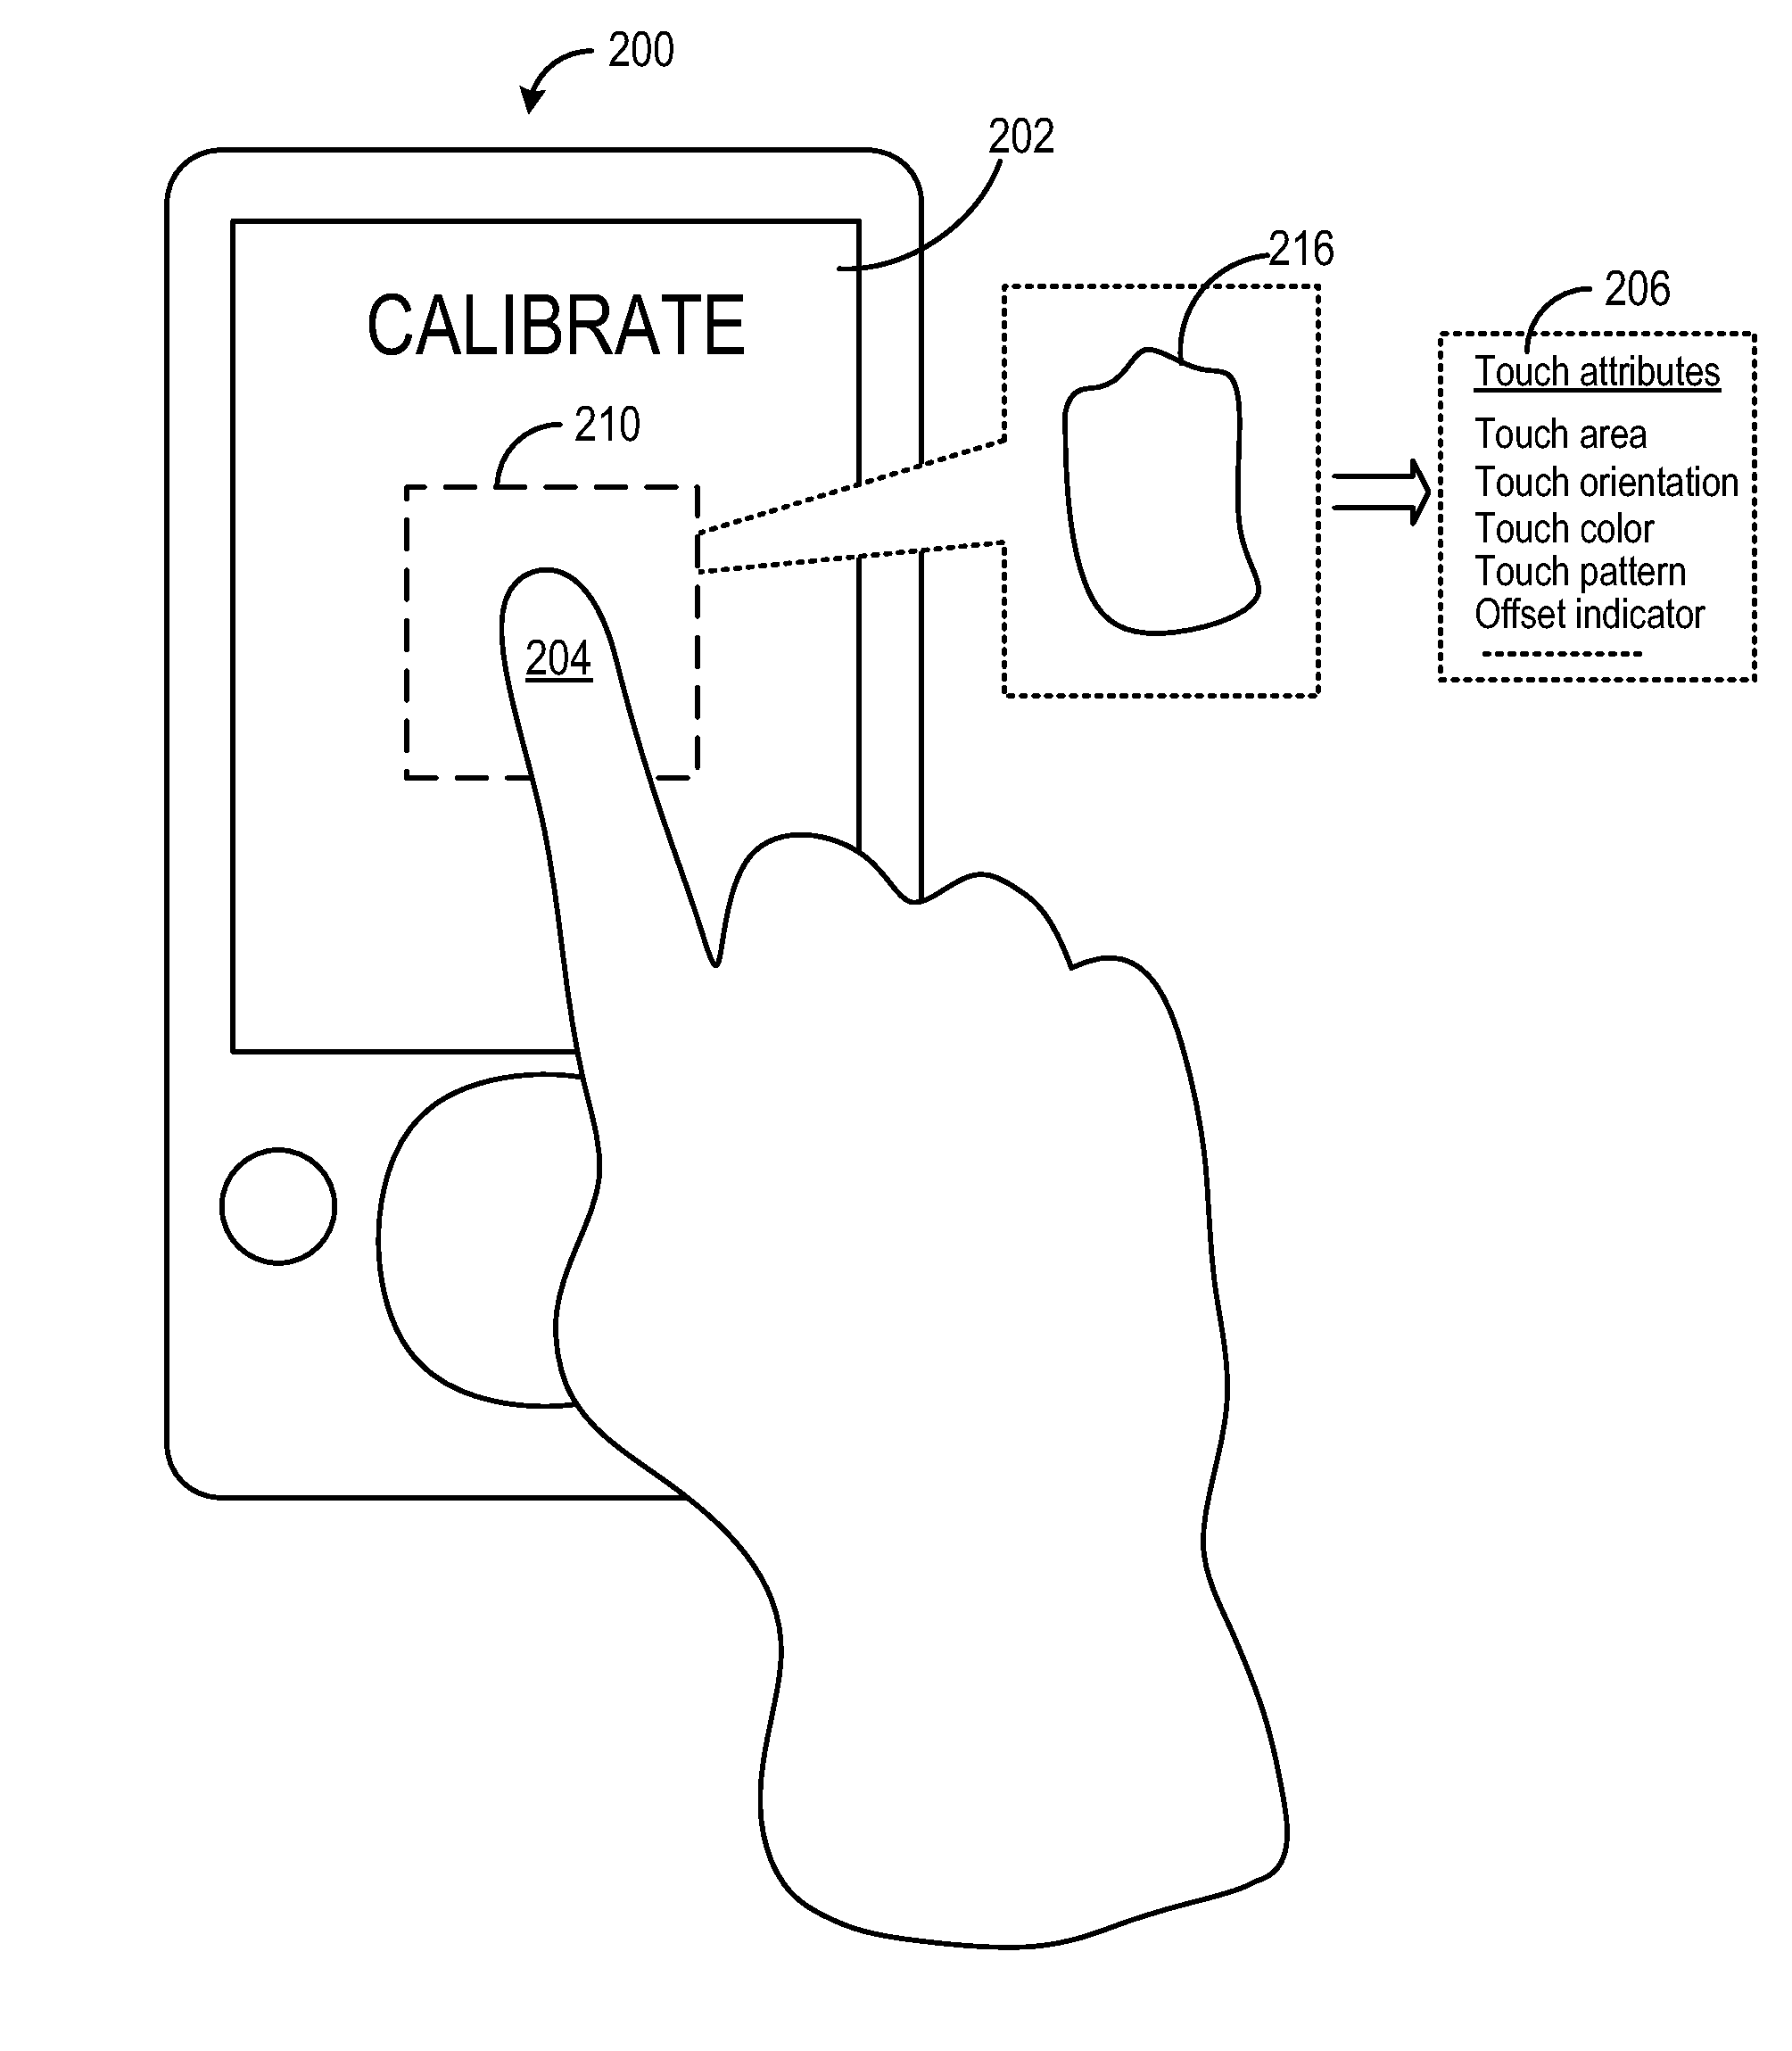 Touch personalization for a display device